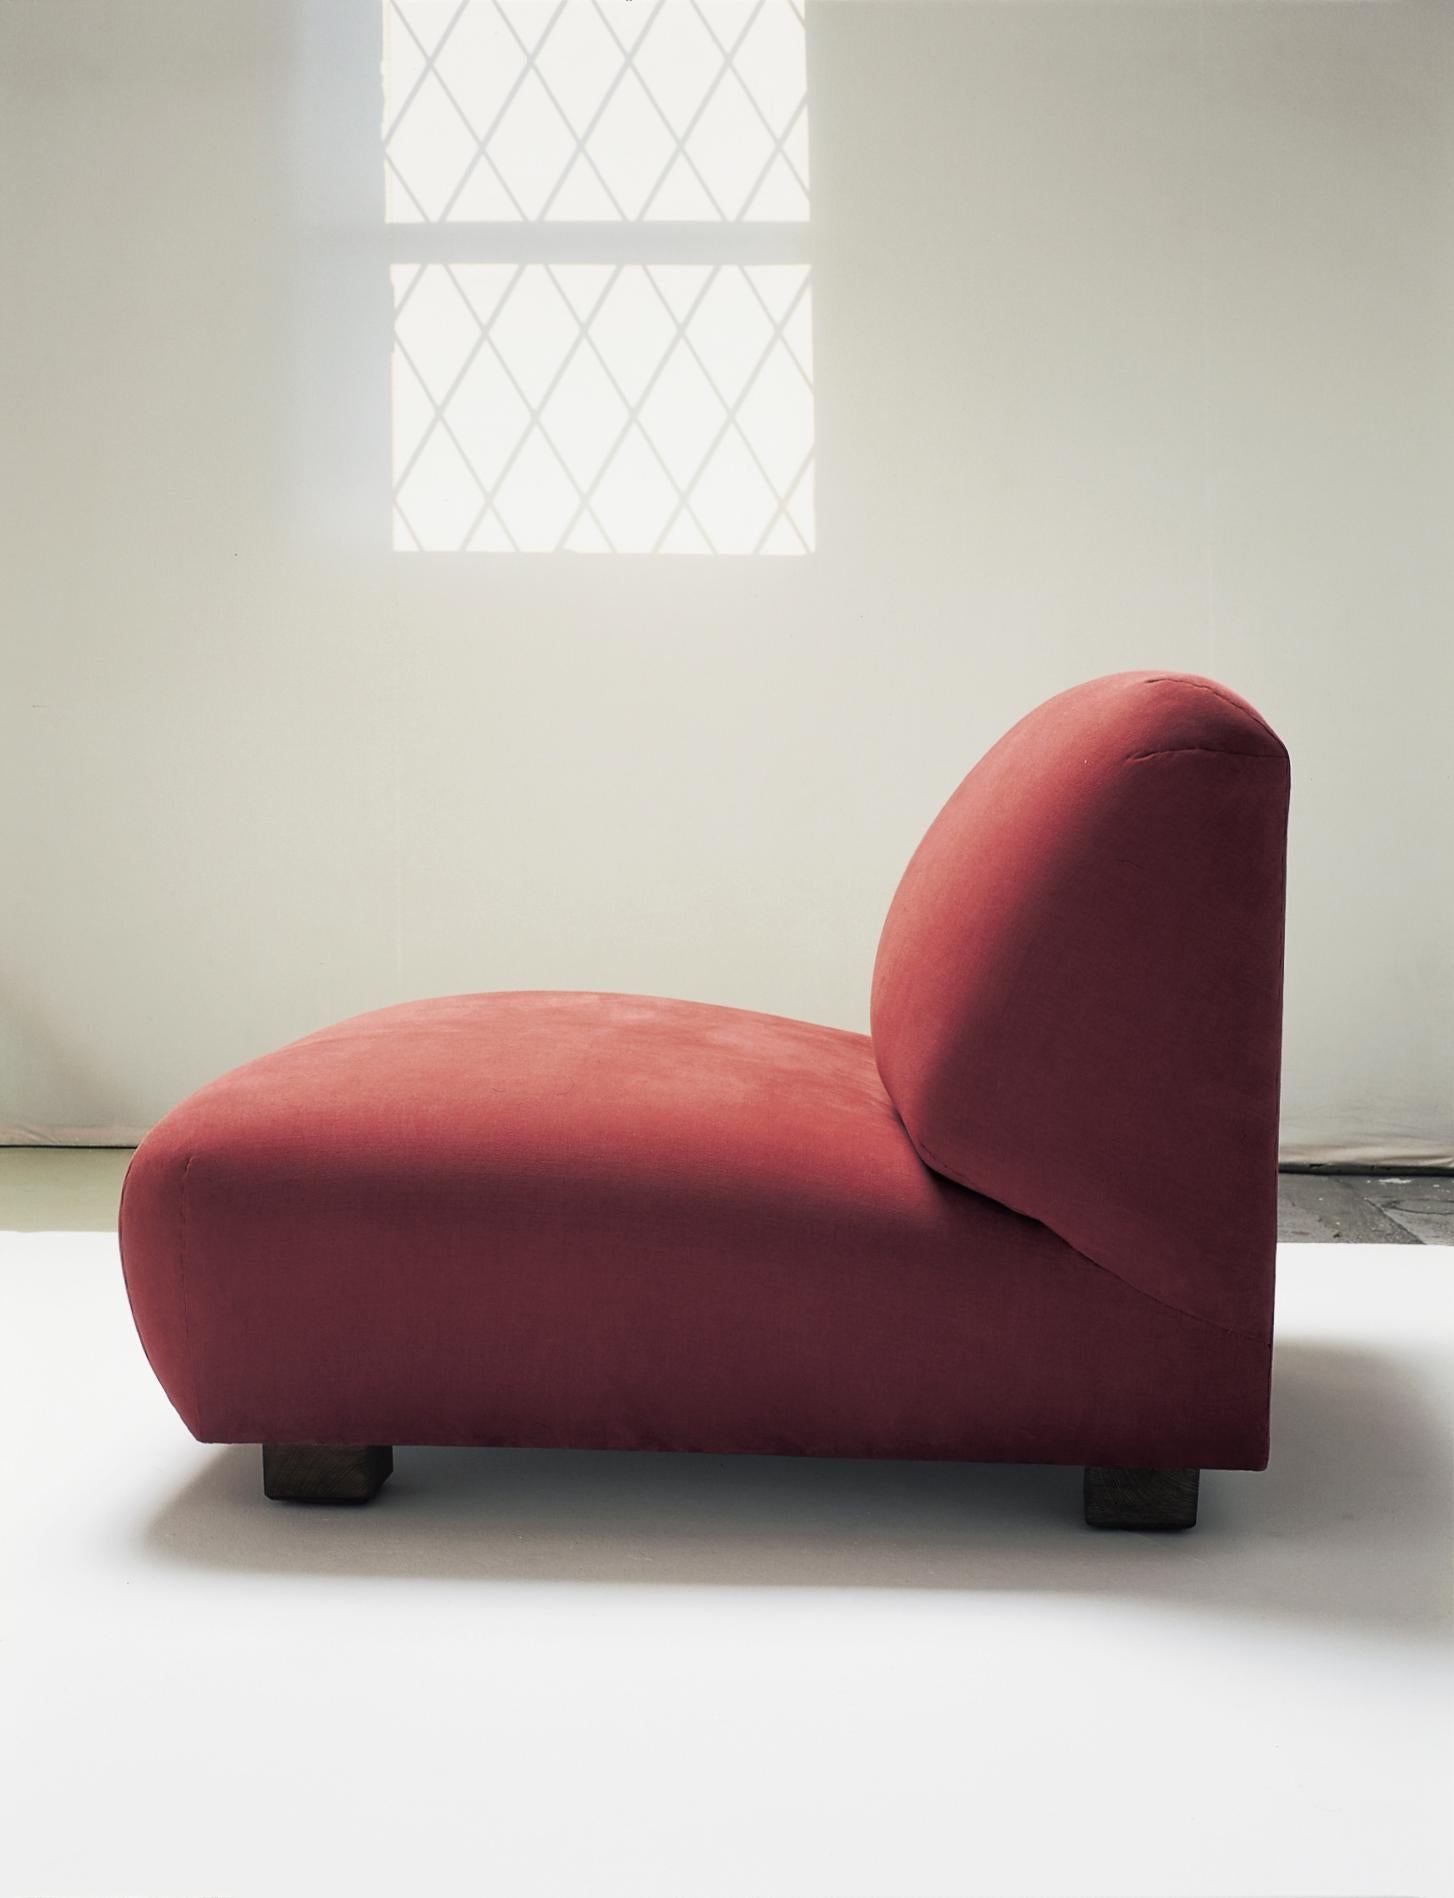 Cadaqué lounge chair by Federico Correa, Alfonso Milá
Dimensions: D 100 x W 100 x H 75 cm
Materials: beech wood, fabric.
Available in other fabrics.

The Cadaqués ensemble sums up an entire philosophy of good living in the form of a sofa,